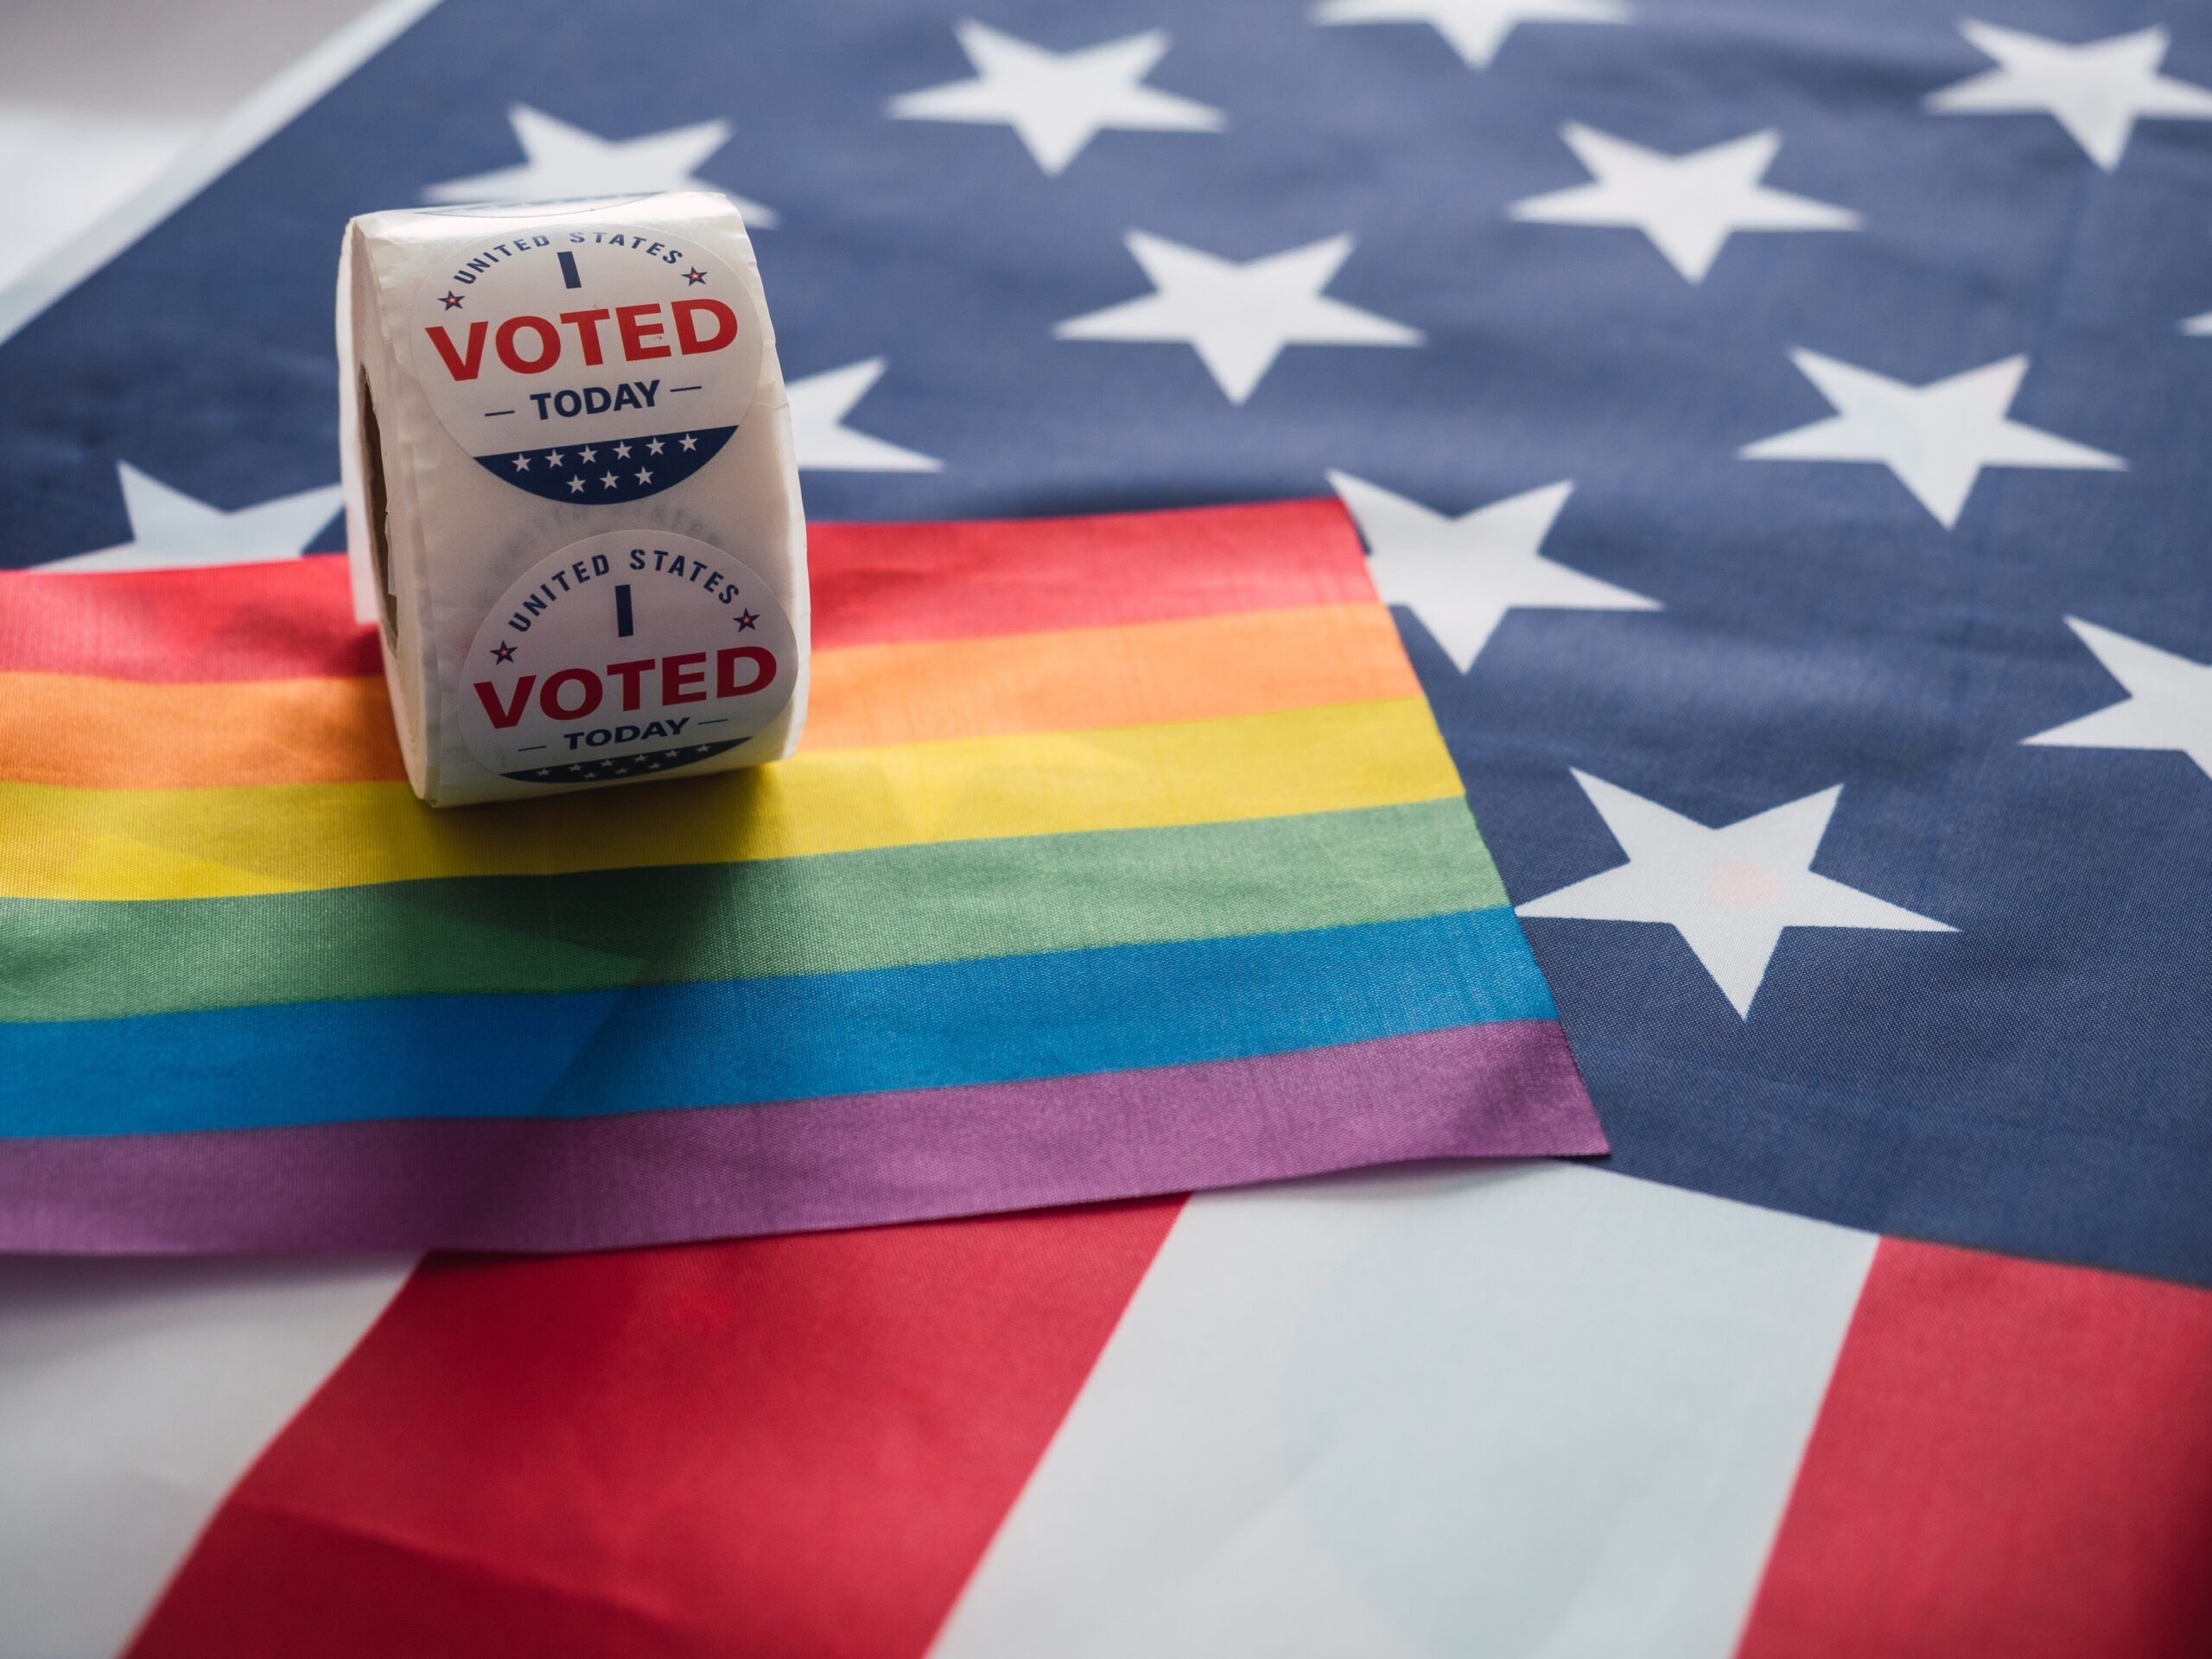 I voted sticker roll on top of a small rainbow flag, which rests on top of a large American flag